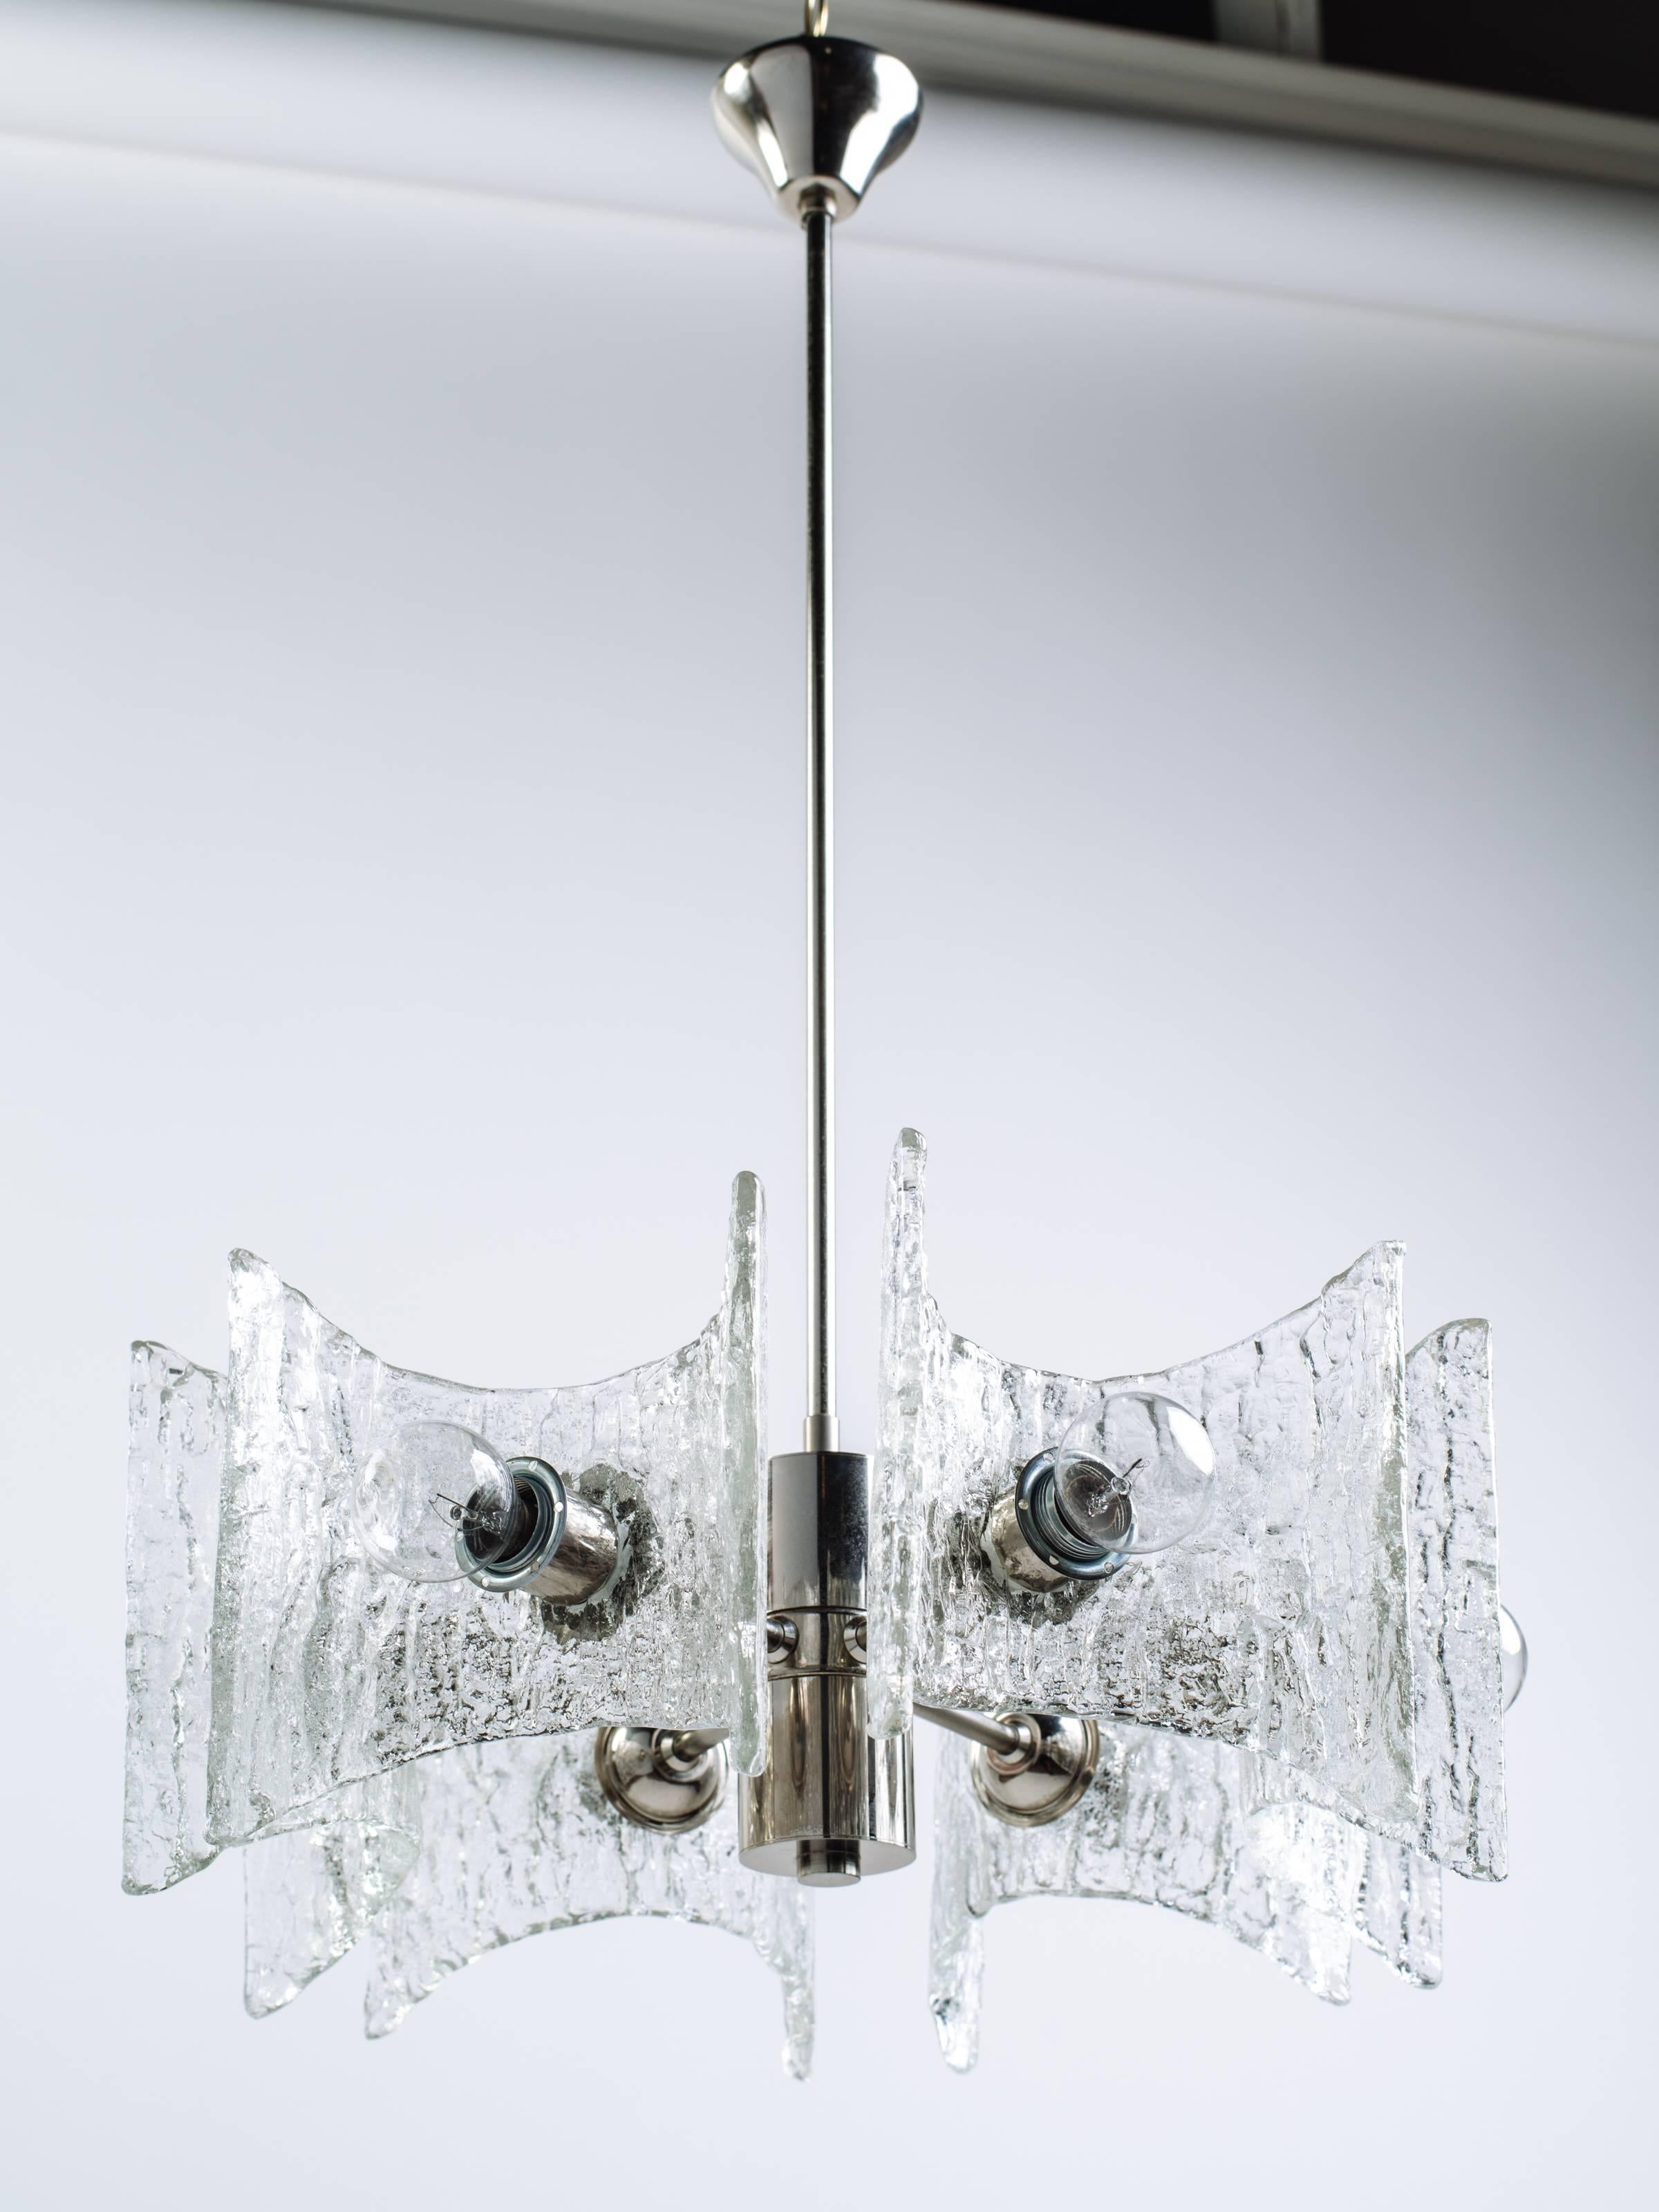 Mid-Century Modern star shaped chandelier with textured glass and chrome metal frame. Fitted with six lights and features curved handblown shades with stylized pointed corners.  By German designer J.T. Kalmar, known for his iconic ice glass designs.